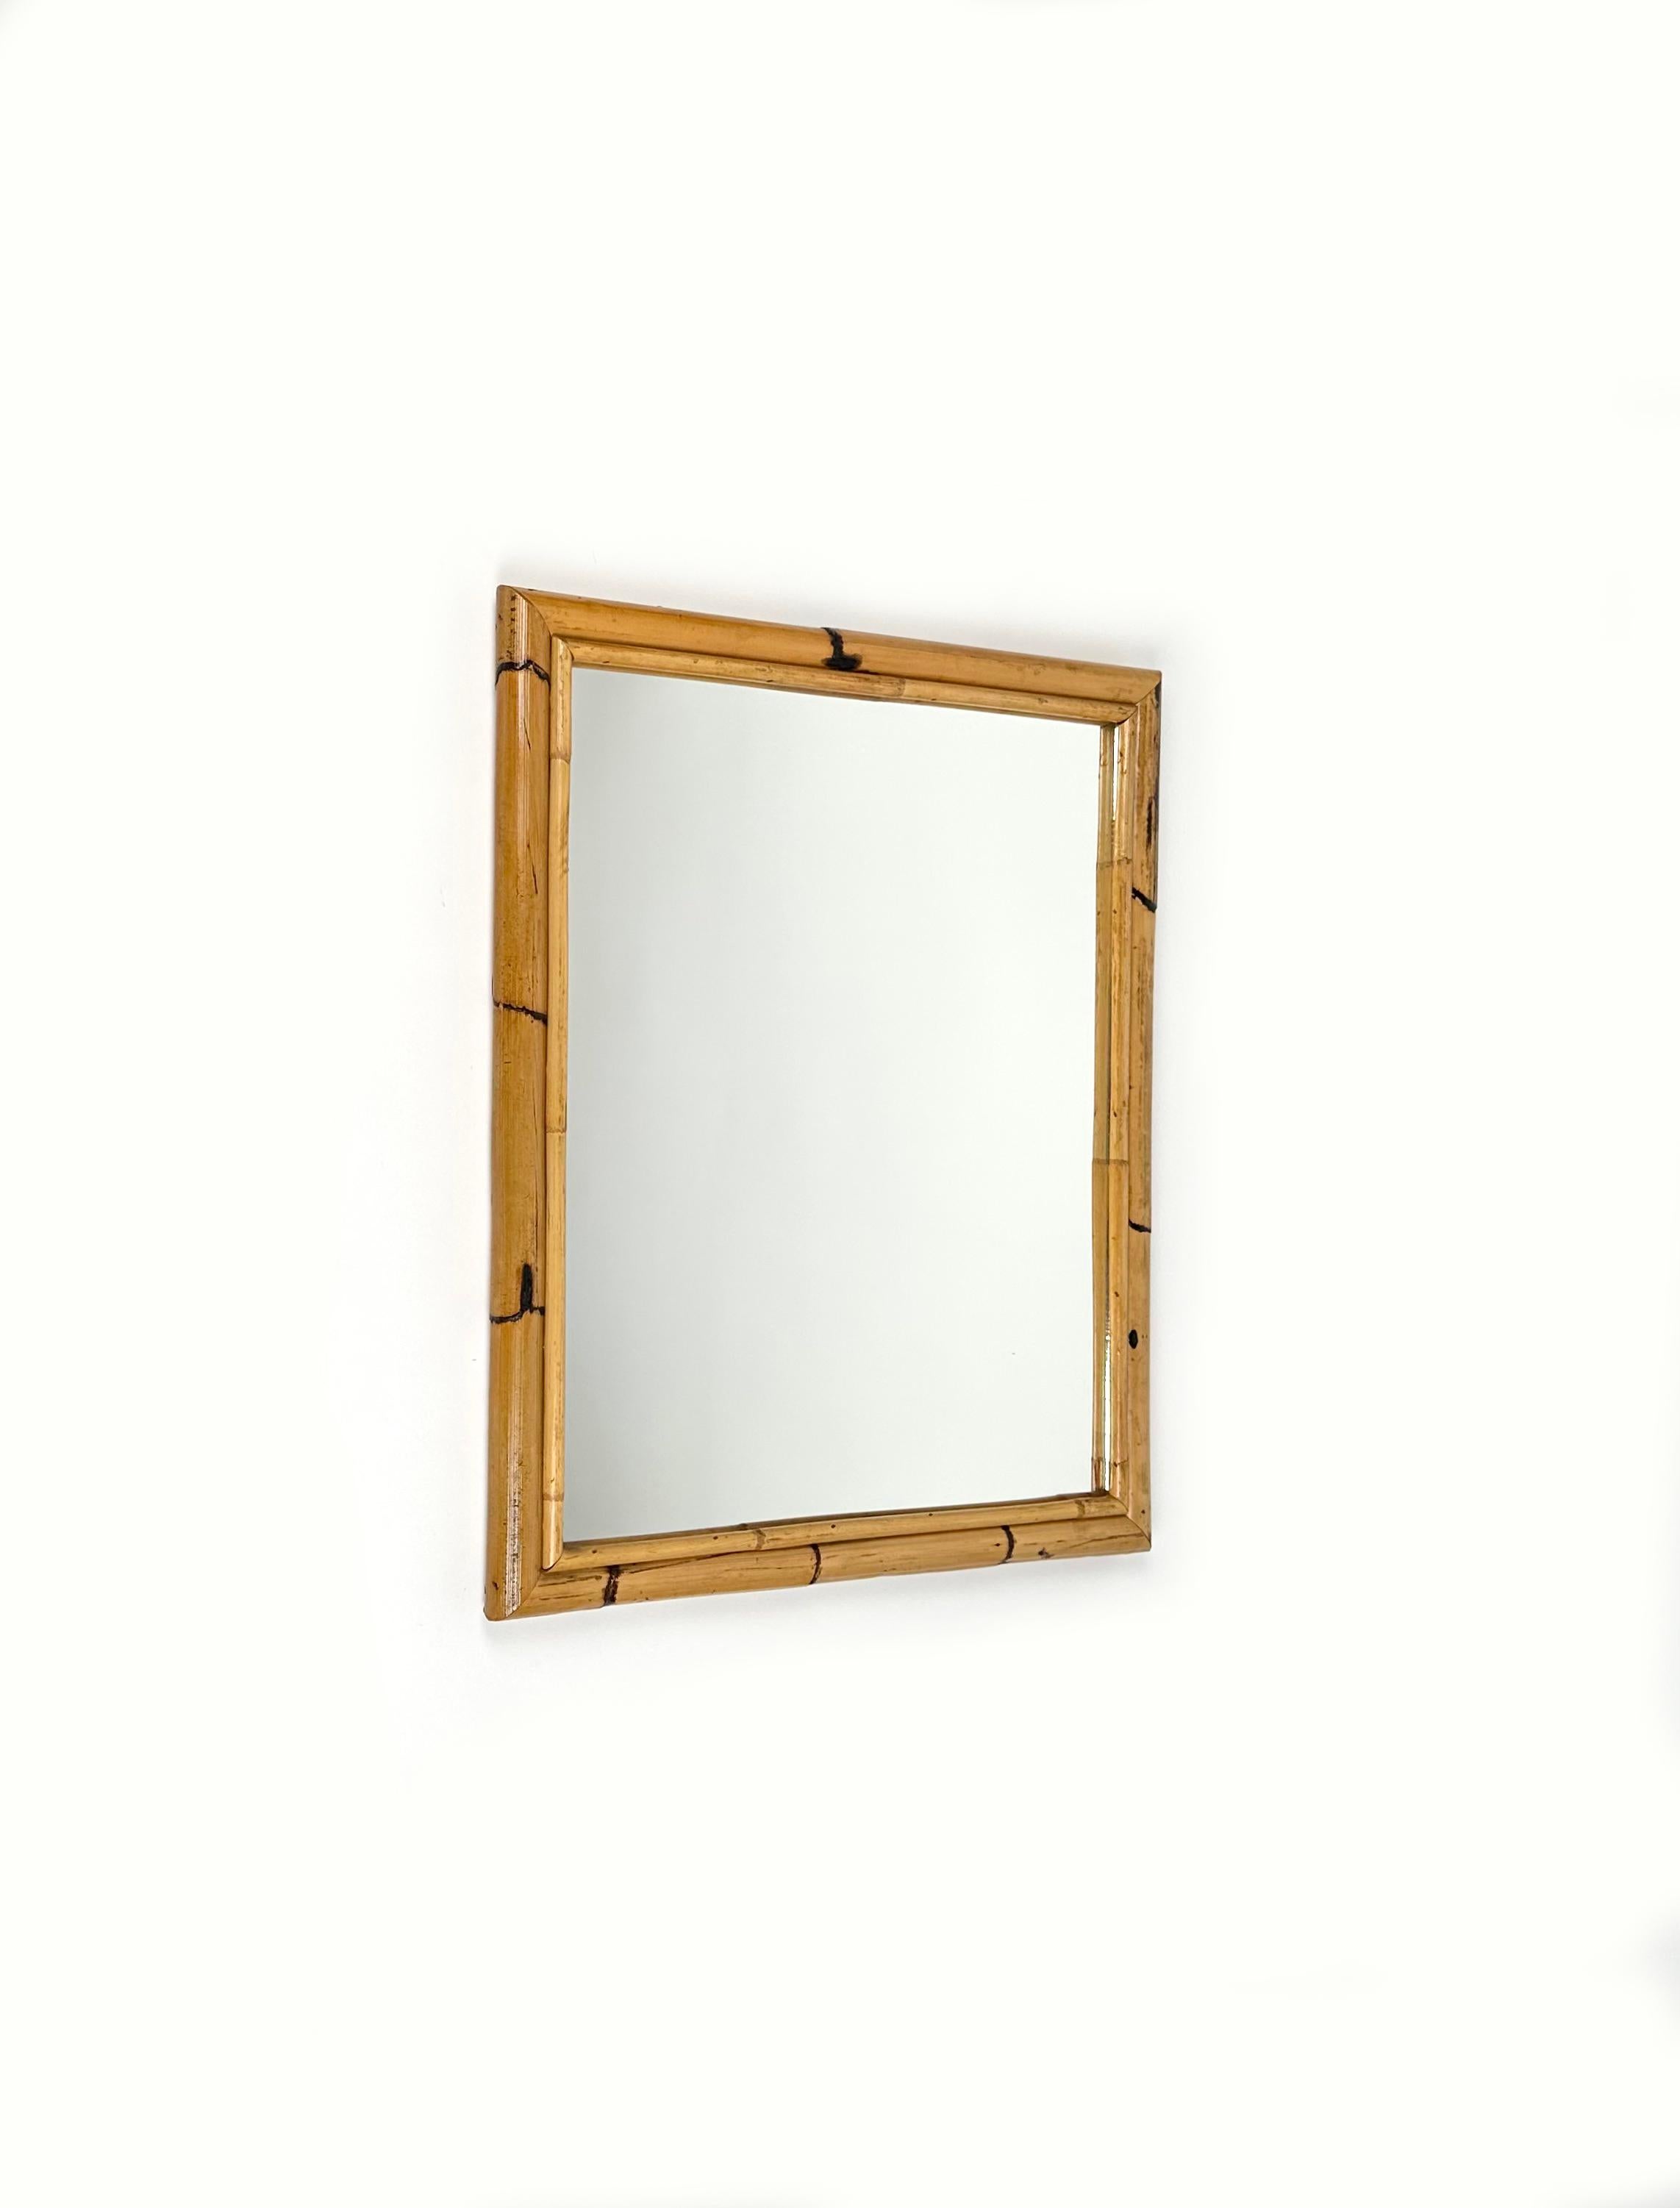 Italian Midcentury Rectangular Wall Mirror Double Bamboo Frame, Italy 1970s For Sale